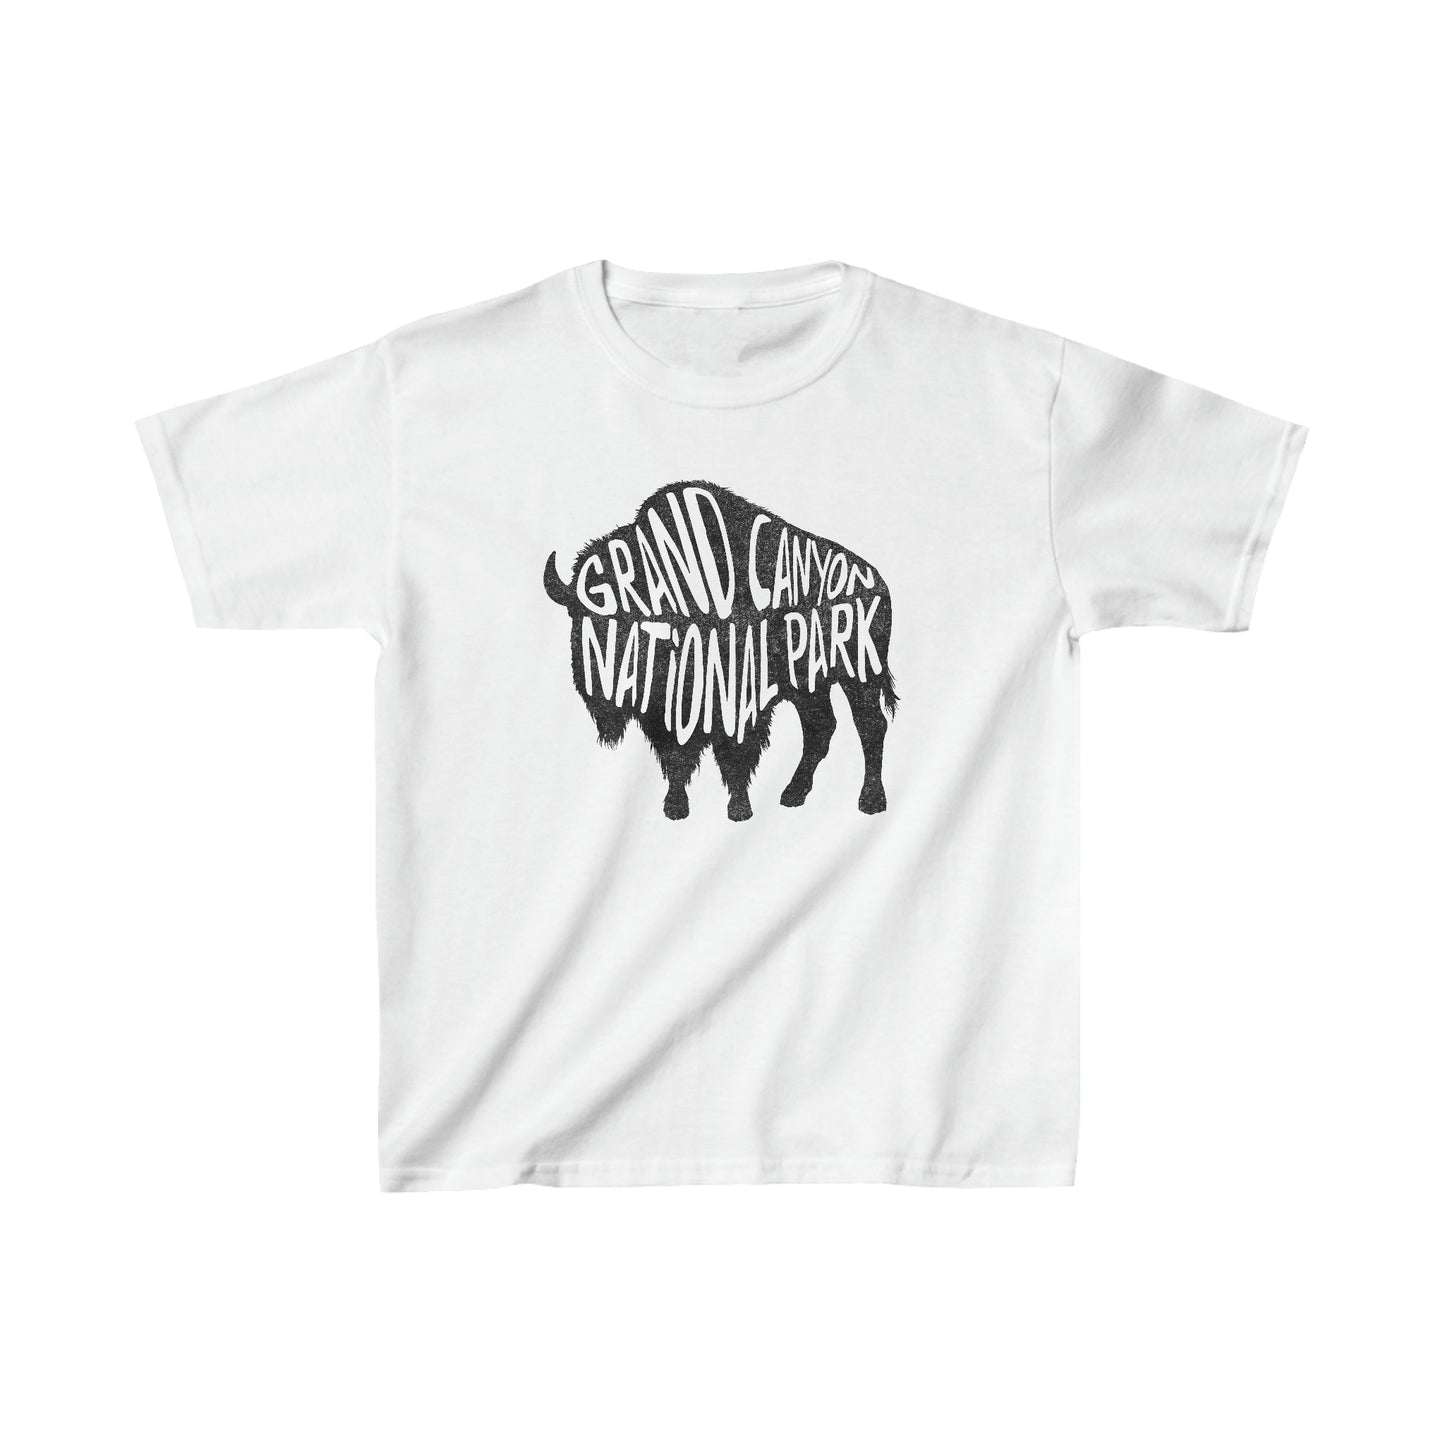 Grand Canyon National Park Child T-Shirt - Bison Chunky Text